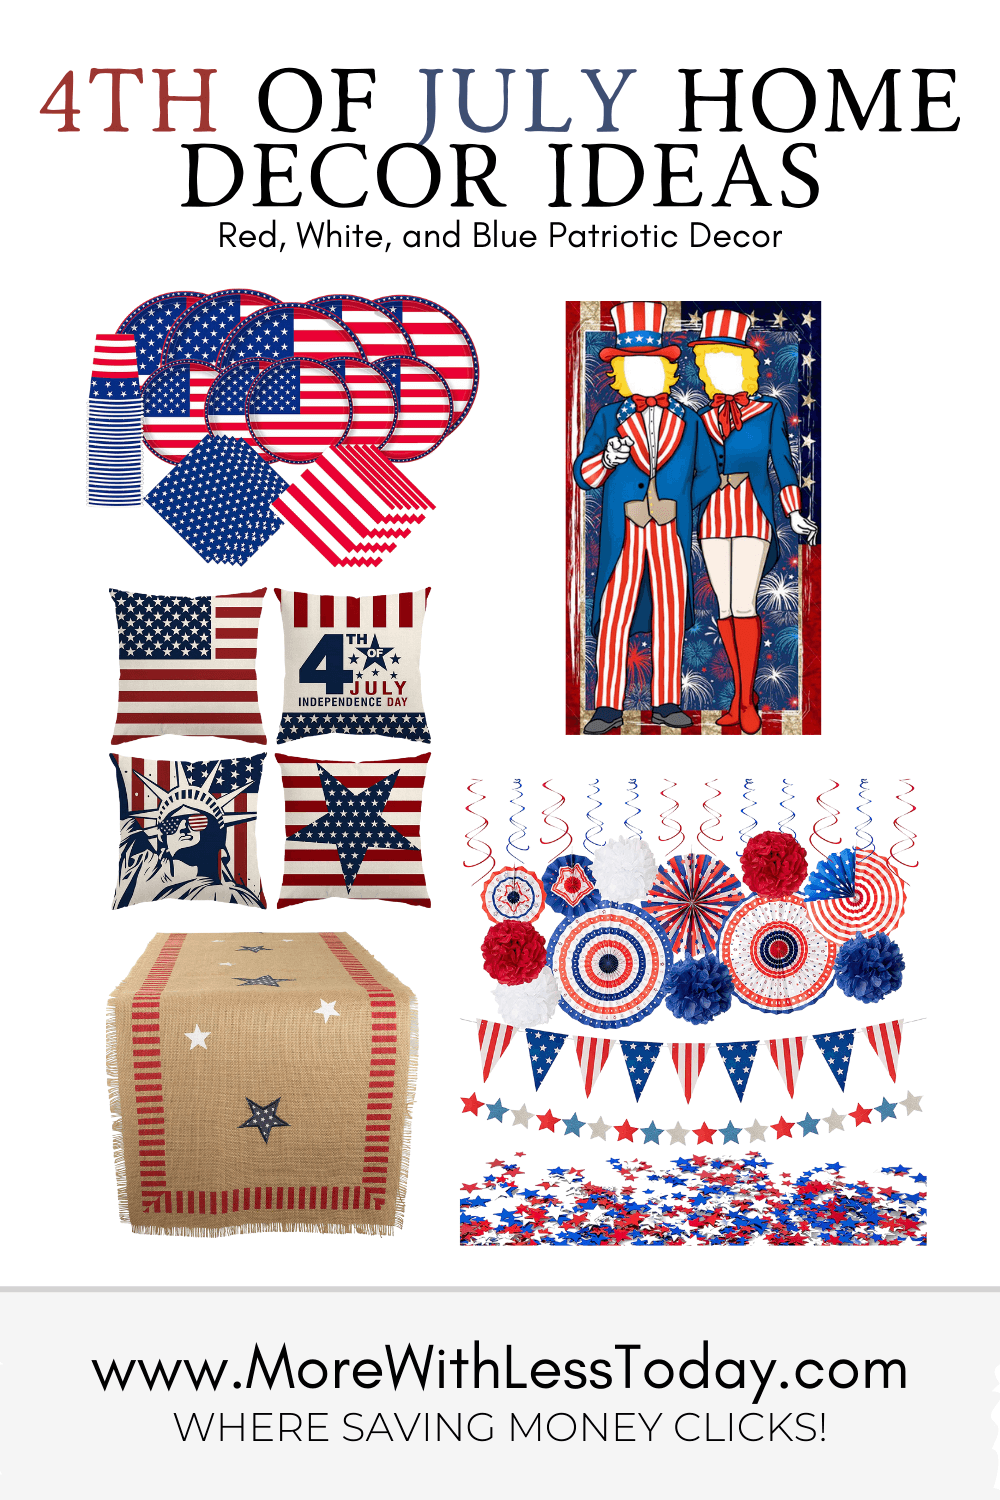 4th of July Home Decorating Ideas - PIN